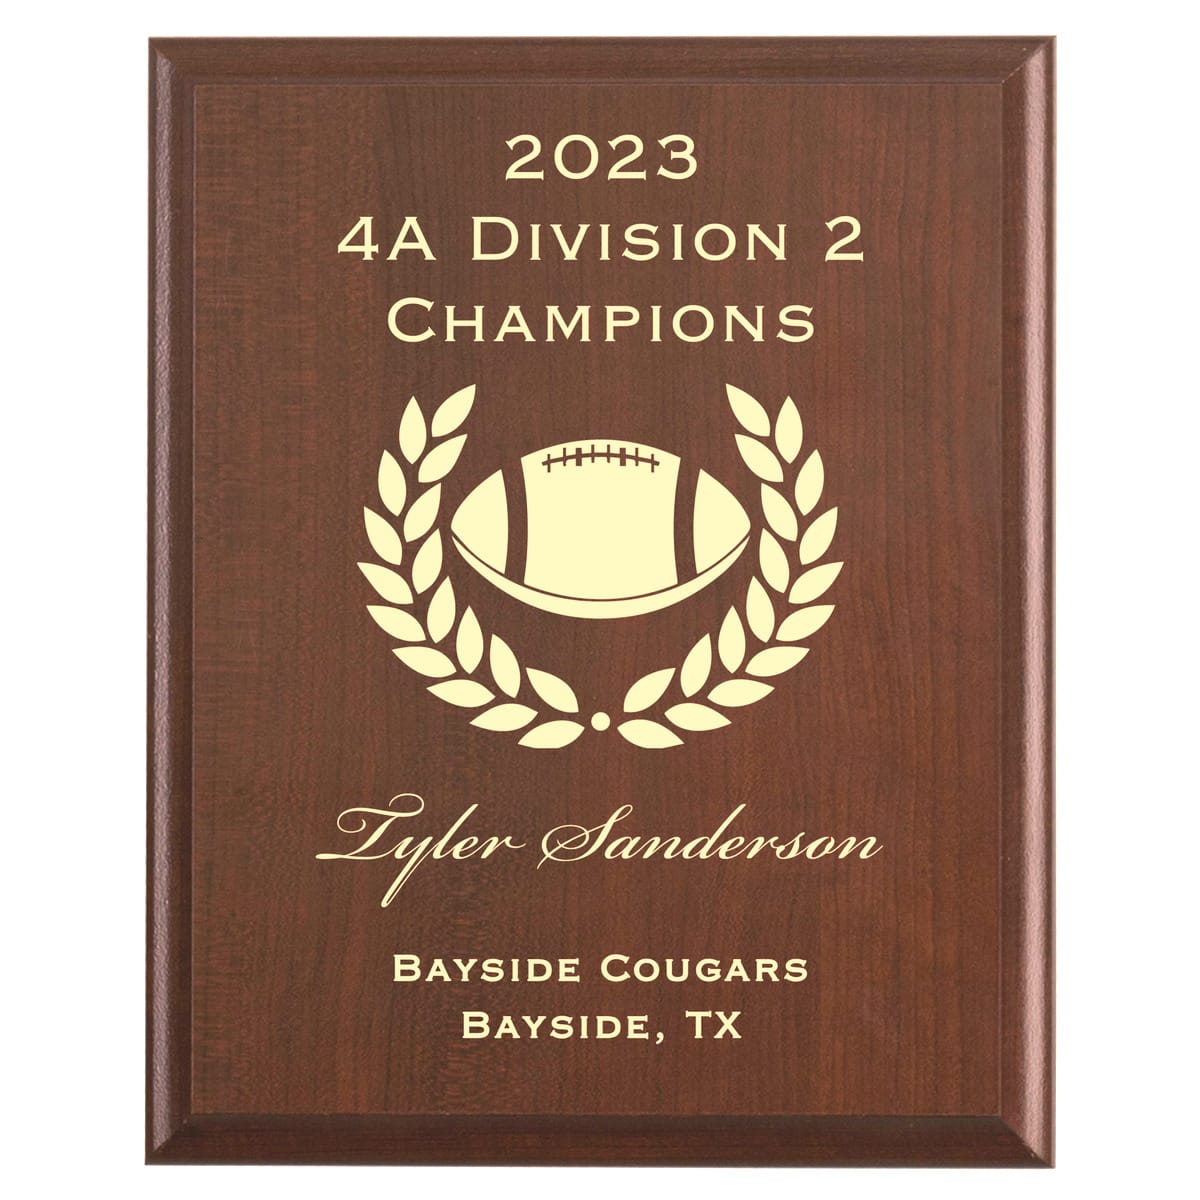 Plaque photo: Football Division Champions Award design with free personalization. Wood style finish with customized text.